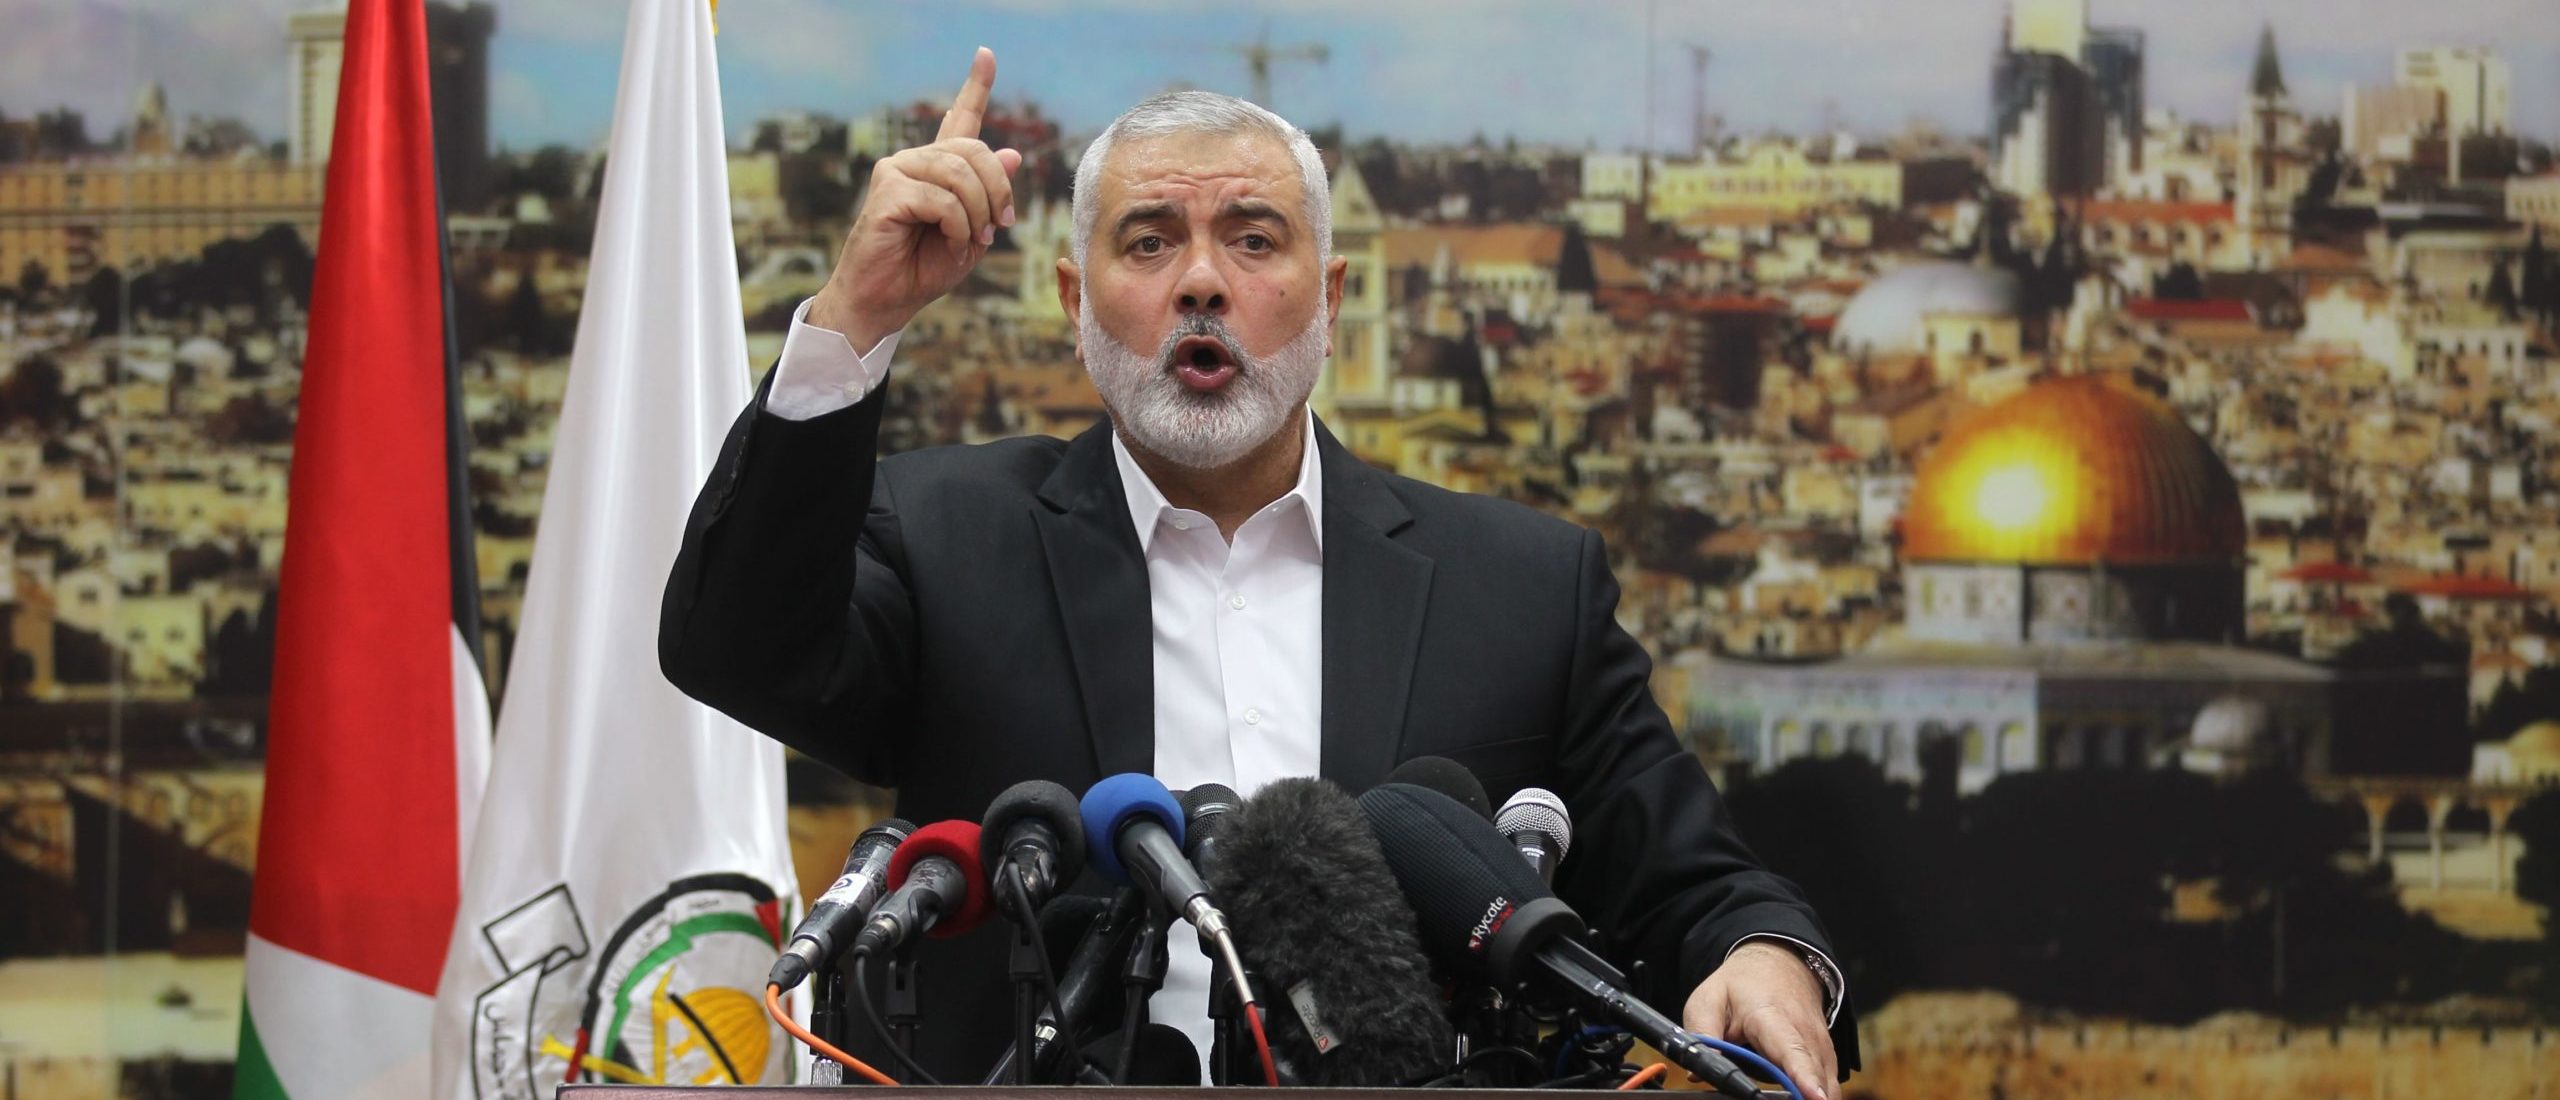 TOPSHOT - Hamas leader Ismail Haniya gestures as he delivers a speech over US President Donald Trump's decision to recognise Jerusalem as the capital of Israel, in Gaza City on December 7, 2017. Haniya called for a new Palestinian intifada, or uprising. This Zionist policy supported by the US cannot be confronted unless we ignite a new intifada," the head of the armed Palestinian Islamist movement that runs the Gaza Strip said in a speech. / AFP PHOTO / SAID KHATIB (Photo credit should read SAID KHATIB/AFP via Getty Images)